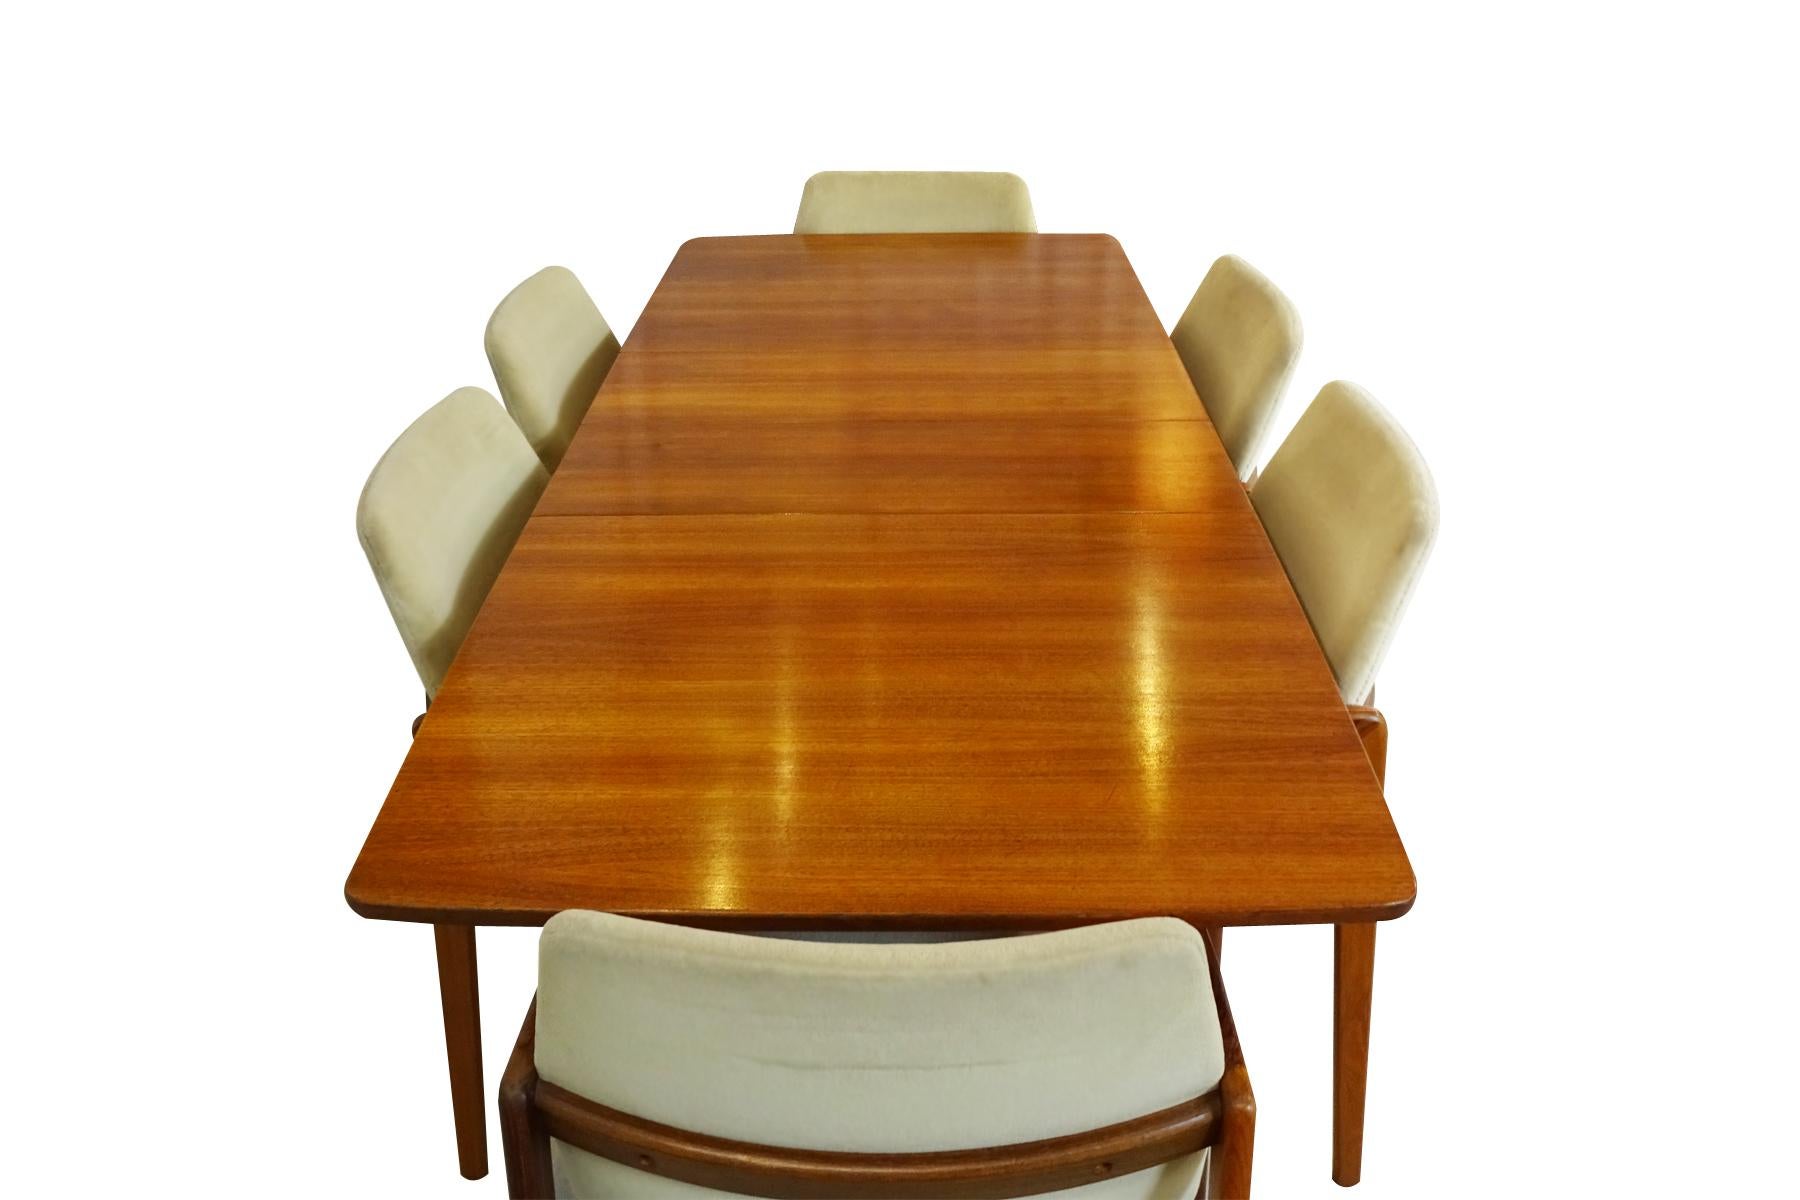 Danish Midcentury space saving dining set featuring a set of 6 Kai Kristiansen chairs matched to a Nils Jonsson extending table.

This is a perfect choice if you’re looking for Danish Mid century dining set with a relatively small foot print to